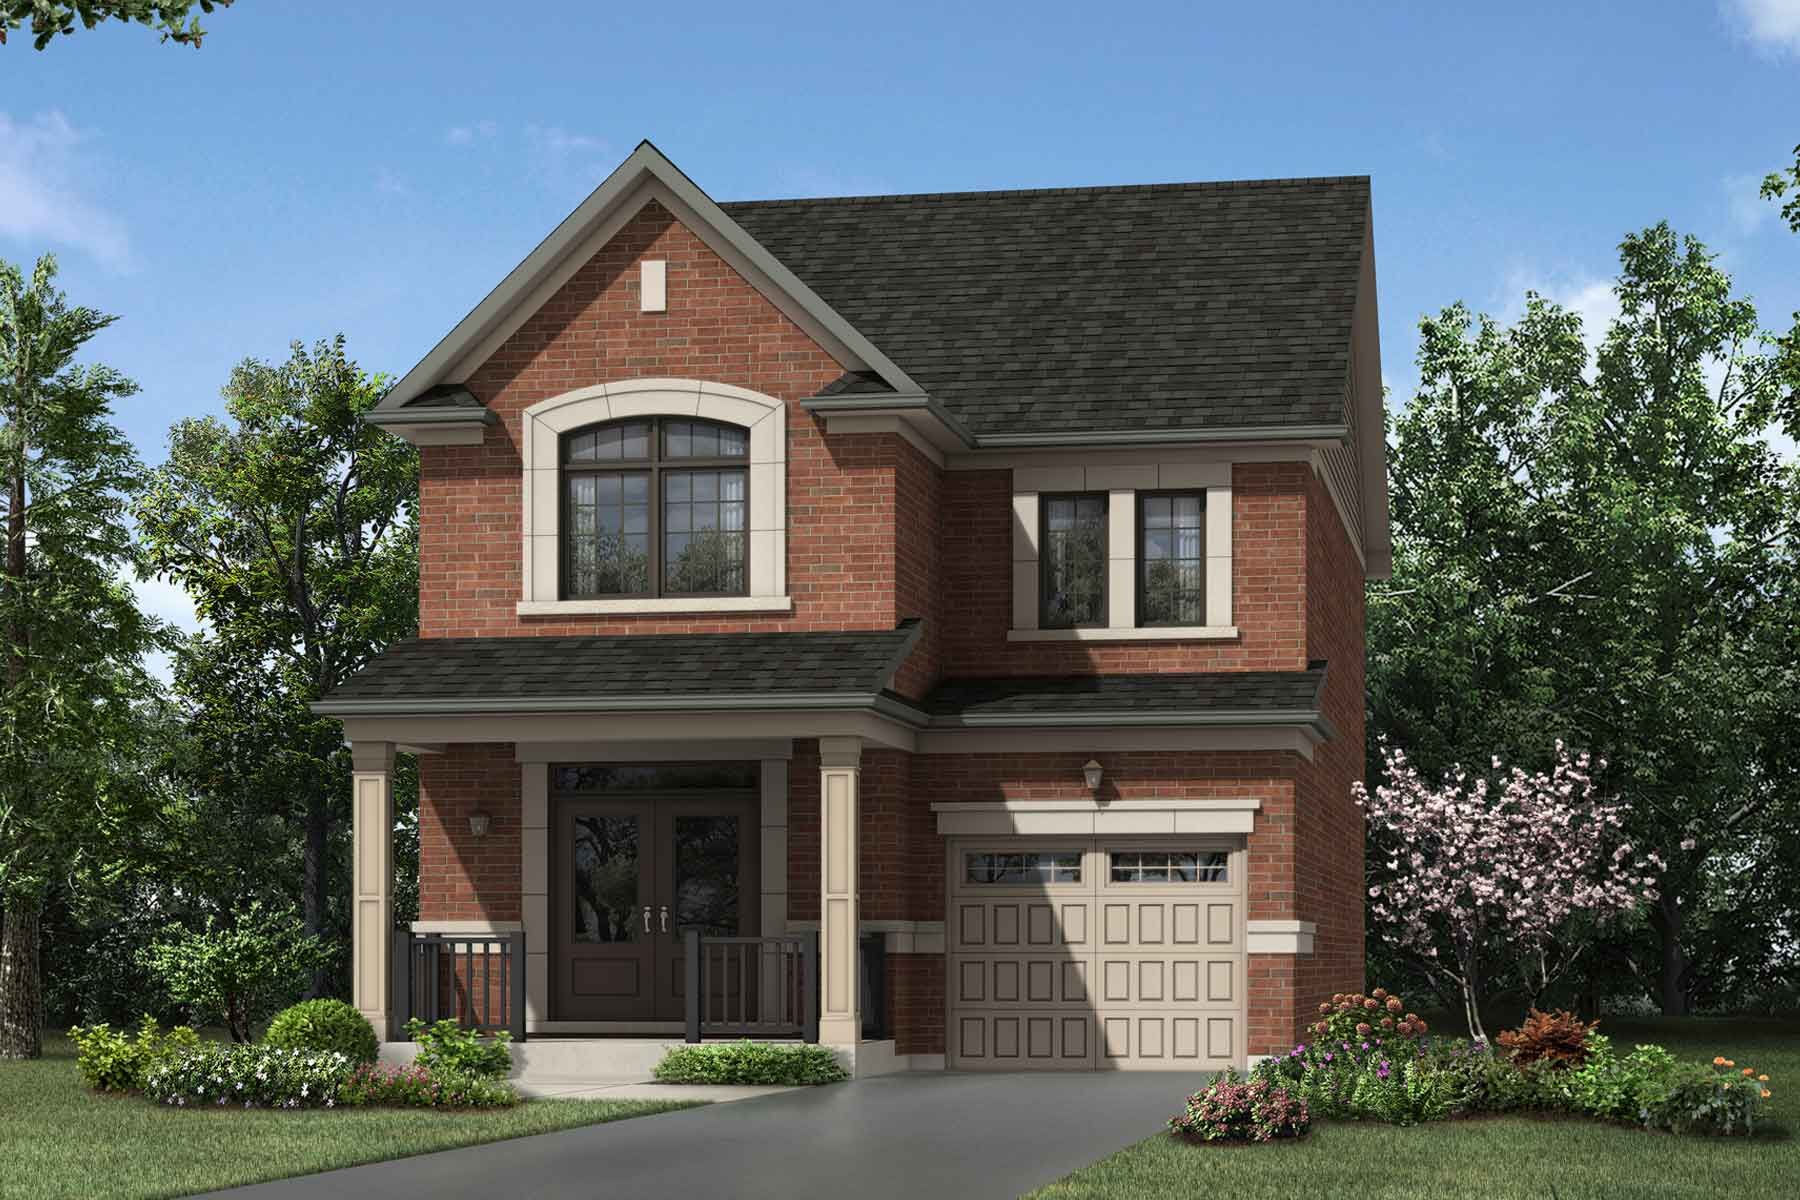 A Traditional style single family home with a single car garage.